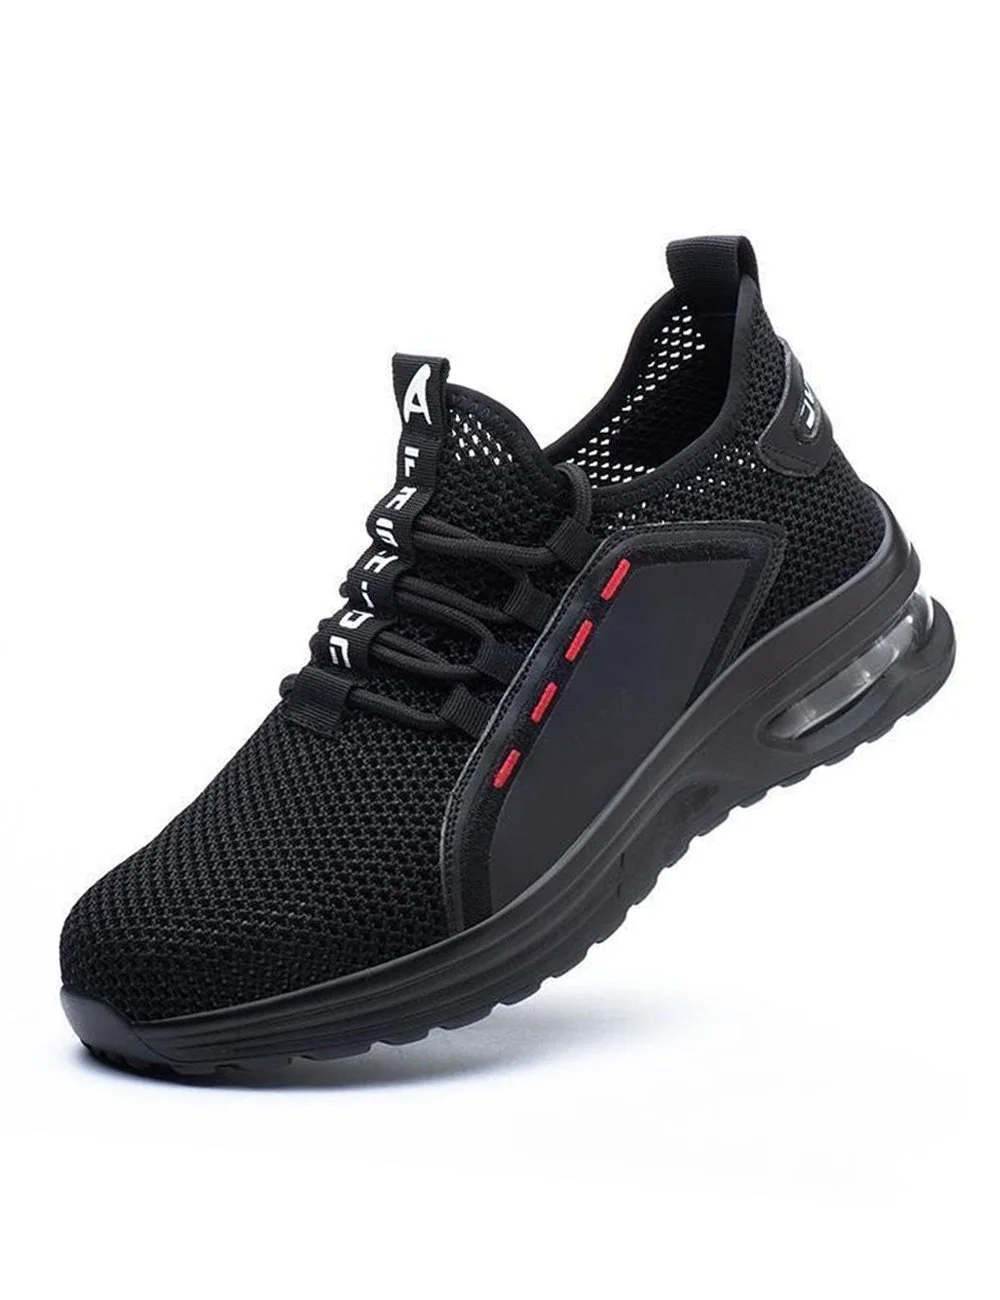 Ultra-Light Breathable Non-Slip Indestructible Shoes